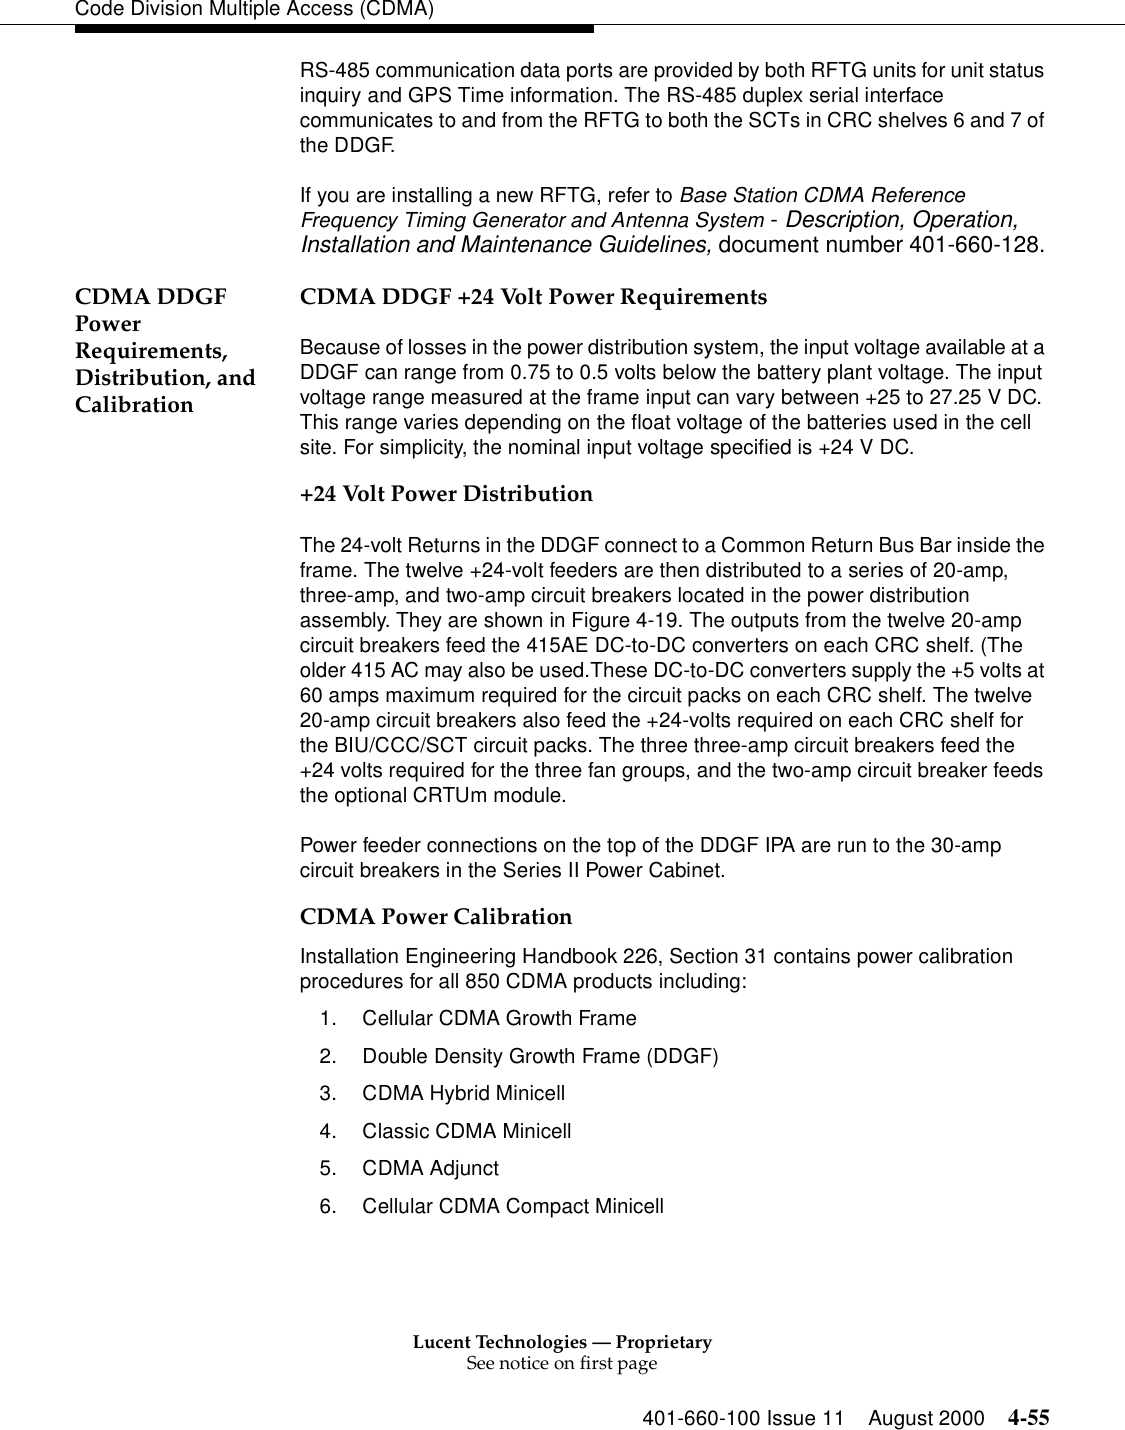 Lucent Technologies — ProprietarySee notice on first page401-660-100 Issue 11 August 2000 4-55Code Division Multiple Access (CDMA)RS-485 communication data ports are provided by both RFTG units for unit status inquiry and GPS Time information. The RS-485 duplex serial interface communicates to and from the RFTG to both the SCTs in CRC shelves 6 and 7 of the DDGF.If you are installing a new RFTG, refer to Base Station CDMA Reference Frequency Timing Generator and Antenna System - Description, Operation, Installation and Maintenance Guidelines, document number 401-660-128.CDMA DDGF Power Requirements, Distribution, and CalibrationCDMA DDGF +24 Volt Power RequirementsBecause of losses in the power distribution system, the input voltage available at a DDGF can range from 0.75 to 0.5 volts below the battery plant voltage. The input voltage range measured at the frame input can vary between +25 to 27.25 V DC. This range varies depending on the float voltage of the batteries used in the cell site. For simplicity, the nominal input voltage specified is +24 V DC.+24 Volt Power DistributionThe 24-volt Returns in the DDGF connect to a Common Return Bus Bar inside the frame. The twelve +24-volt feeders are then distributed to a series of 20-amp, three-amp, and two-amp circuit breakers located in the power distribution assembly. They are shown in Figure 4-19. The outputs from the twelve 20-amp circuit breakers feed the 415AE DC-to-DC converters on each CRC shelf. (The older 415 AC may also be used.These DC-to-DC converters supply the +5 volts at 60 amps maximum required for the circuit packs on each CRC shelf. The twelve 20-amp circuit breakers also feed the +24-volts required on each CRC shelf for the BIU/CCC/SCT circuit packs. The three three-amp circuit breakers feed the +24 volts required for the three fan groups, and the two-amp circuit breaker feeds the optional CRTUm module.Power feeder connections on the top of the DDGF IPA are run to the 30-amp circuit breakers in the Series II Power Cabinet.CDMA Power CalibrationInstallation Engineering Handbook 226, Section 31 contains power calibration procedures for all 850 CDMA products including:1. Cellular CDMA Growth Frame2. Double Density Growth Frame (DDGF)3. CDMA Hybrid Minicell4. Classic CDMA Minicell5. CDMA Adjunct6. Cellular CDMA Compact Minicell